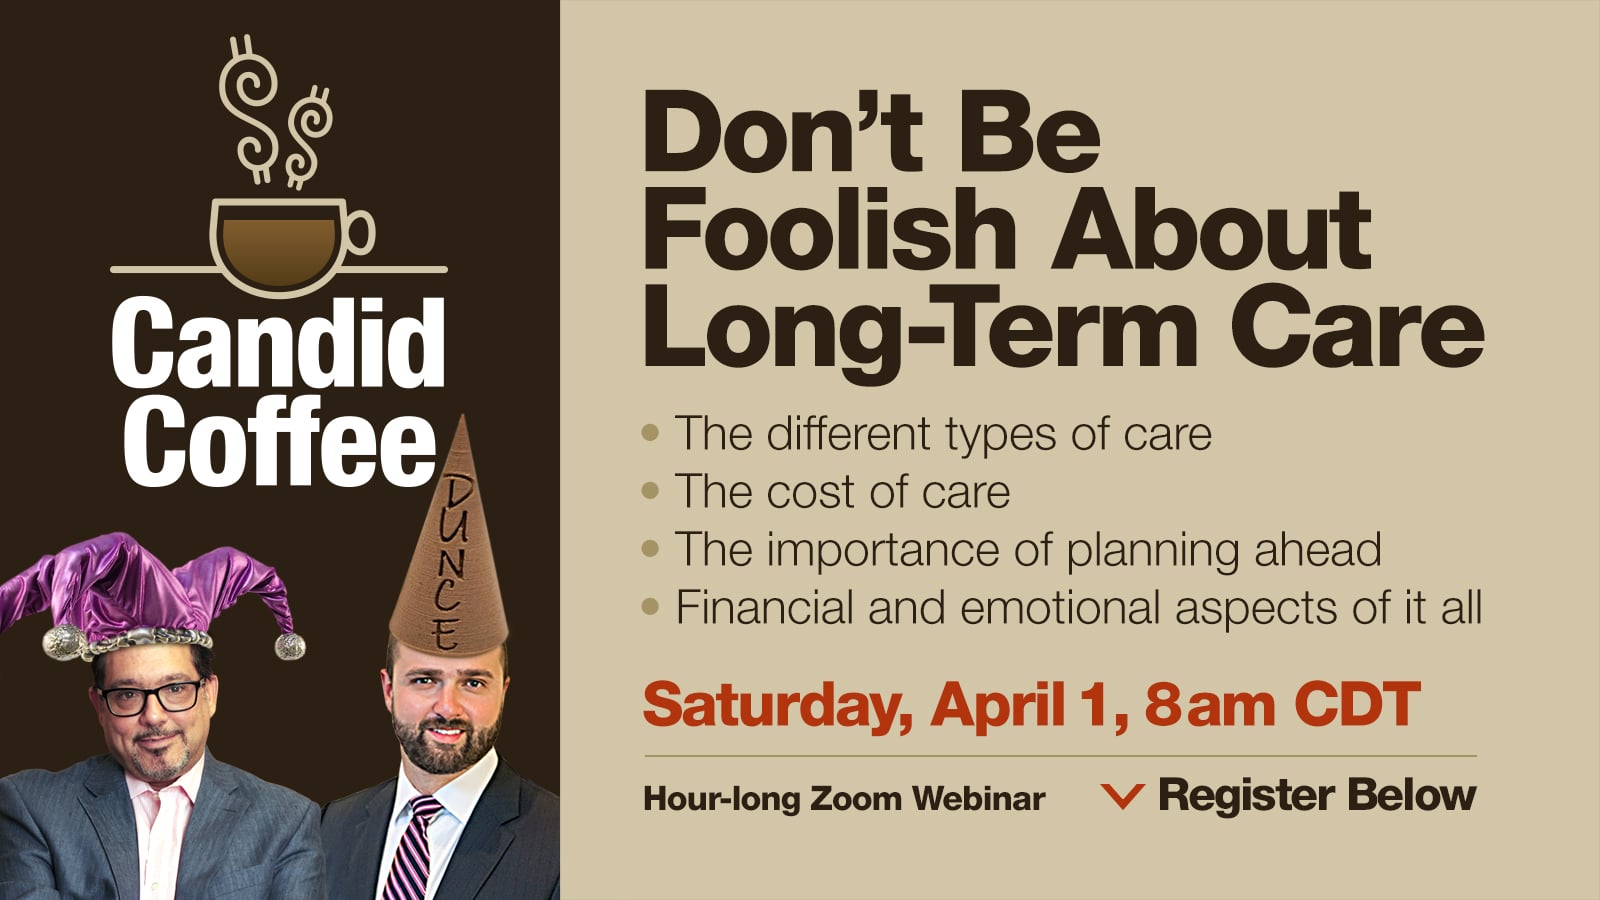 Candid Coffee: Don't Be Foolish About Long-Term Care